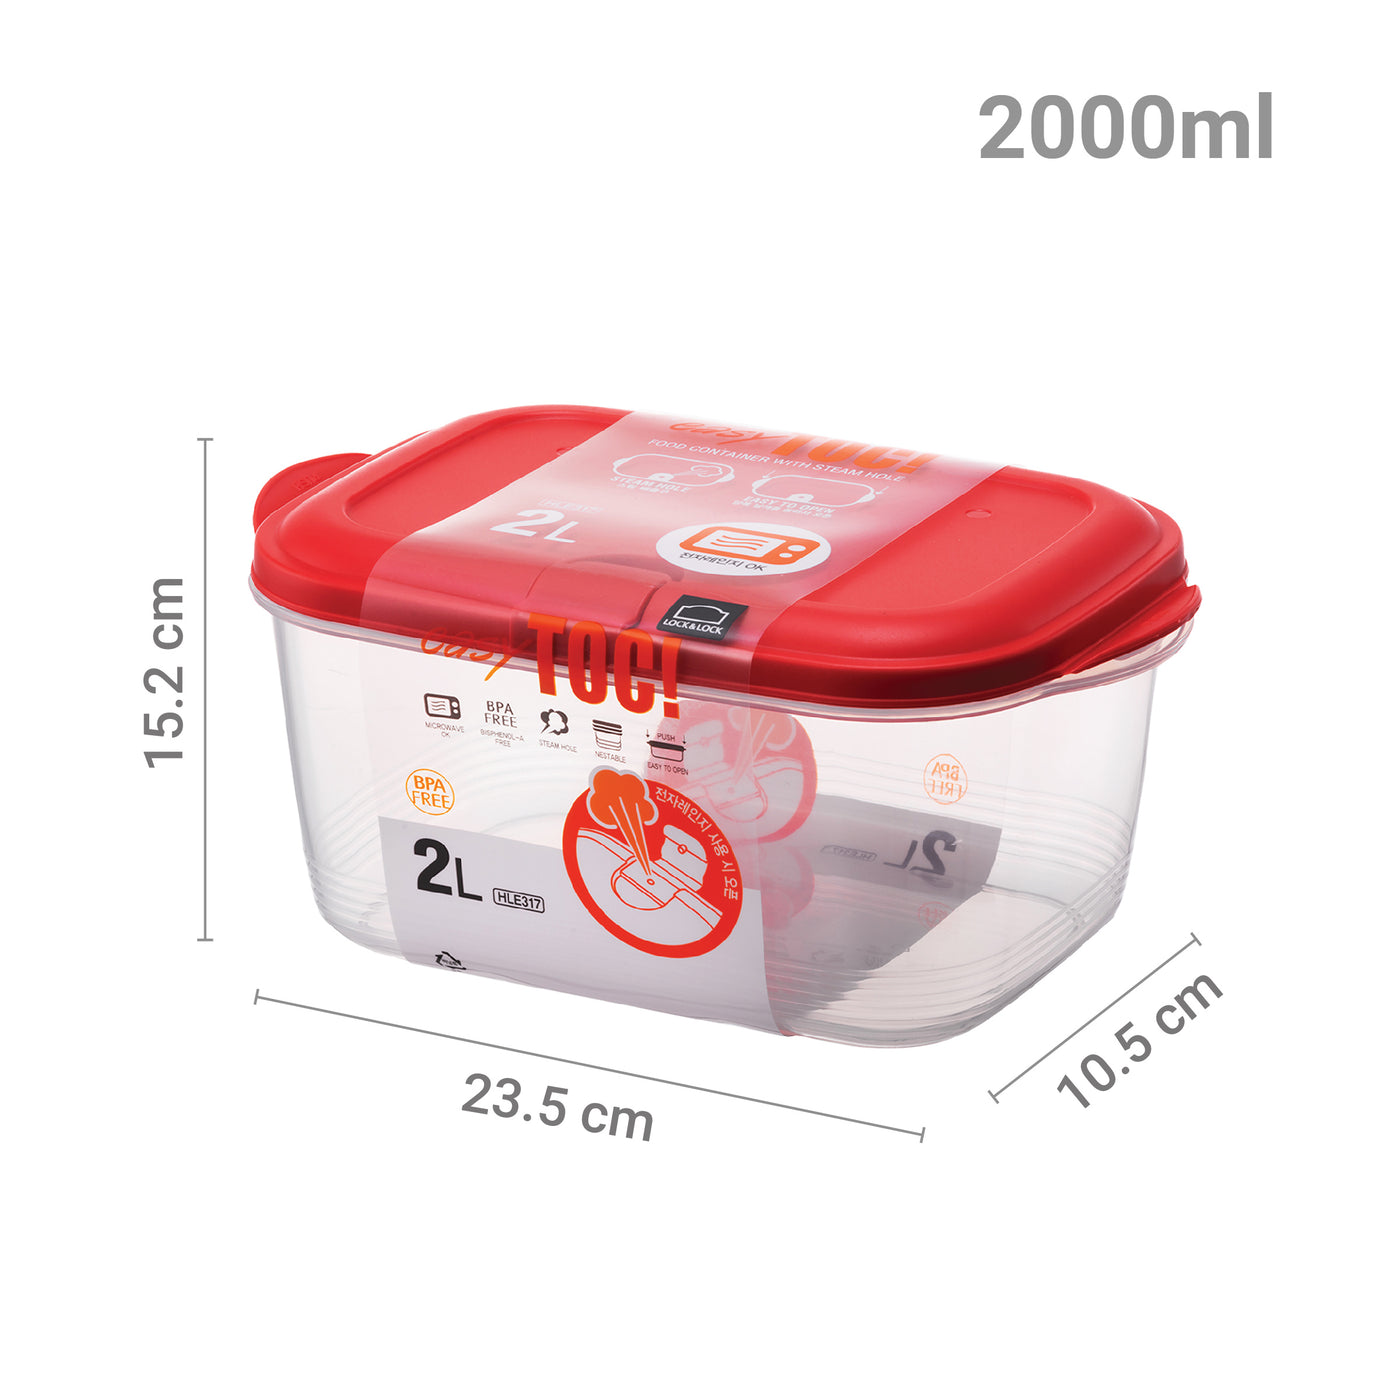 RECTANGLE - 2LTR (Red)